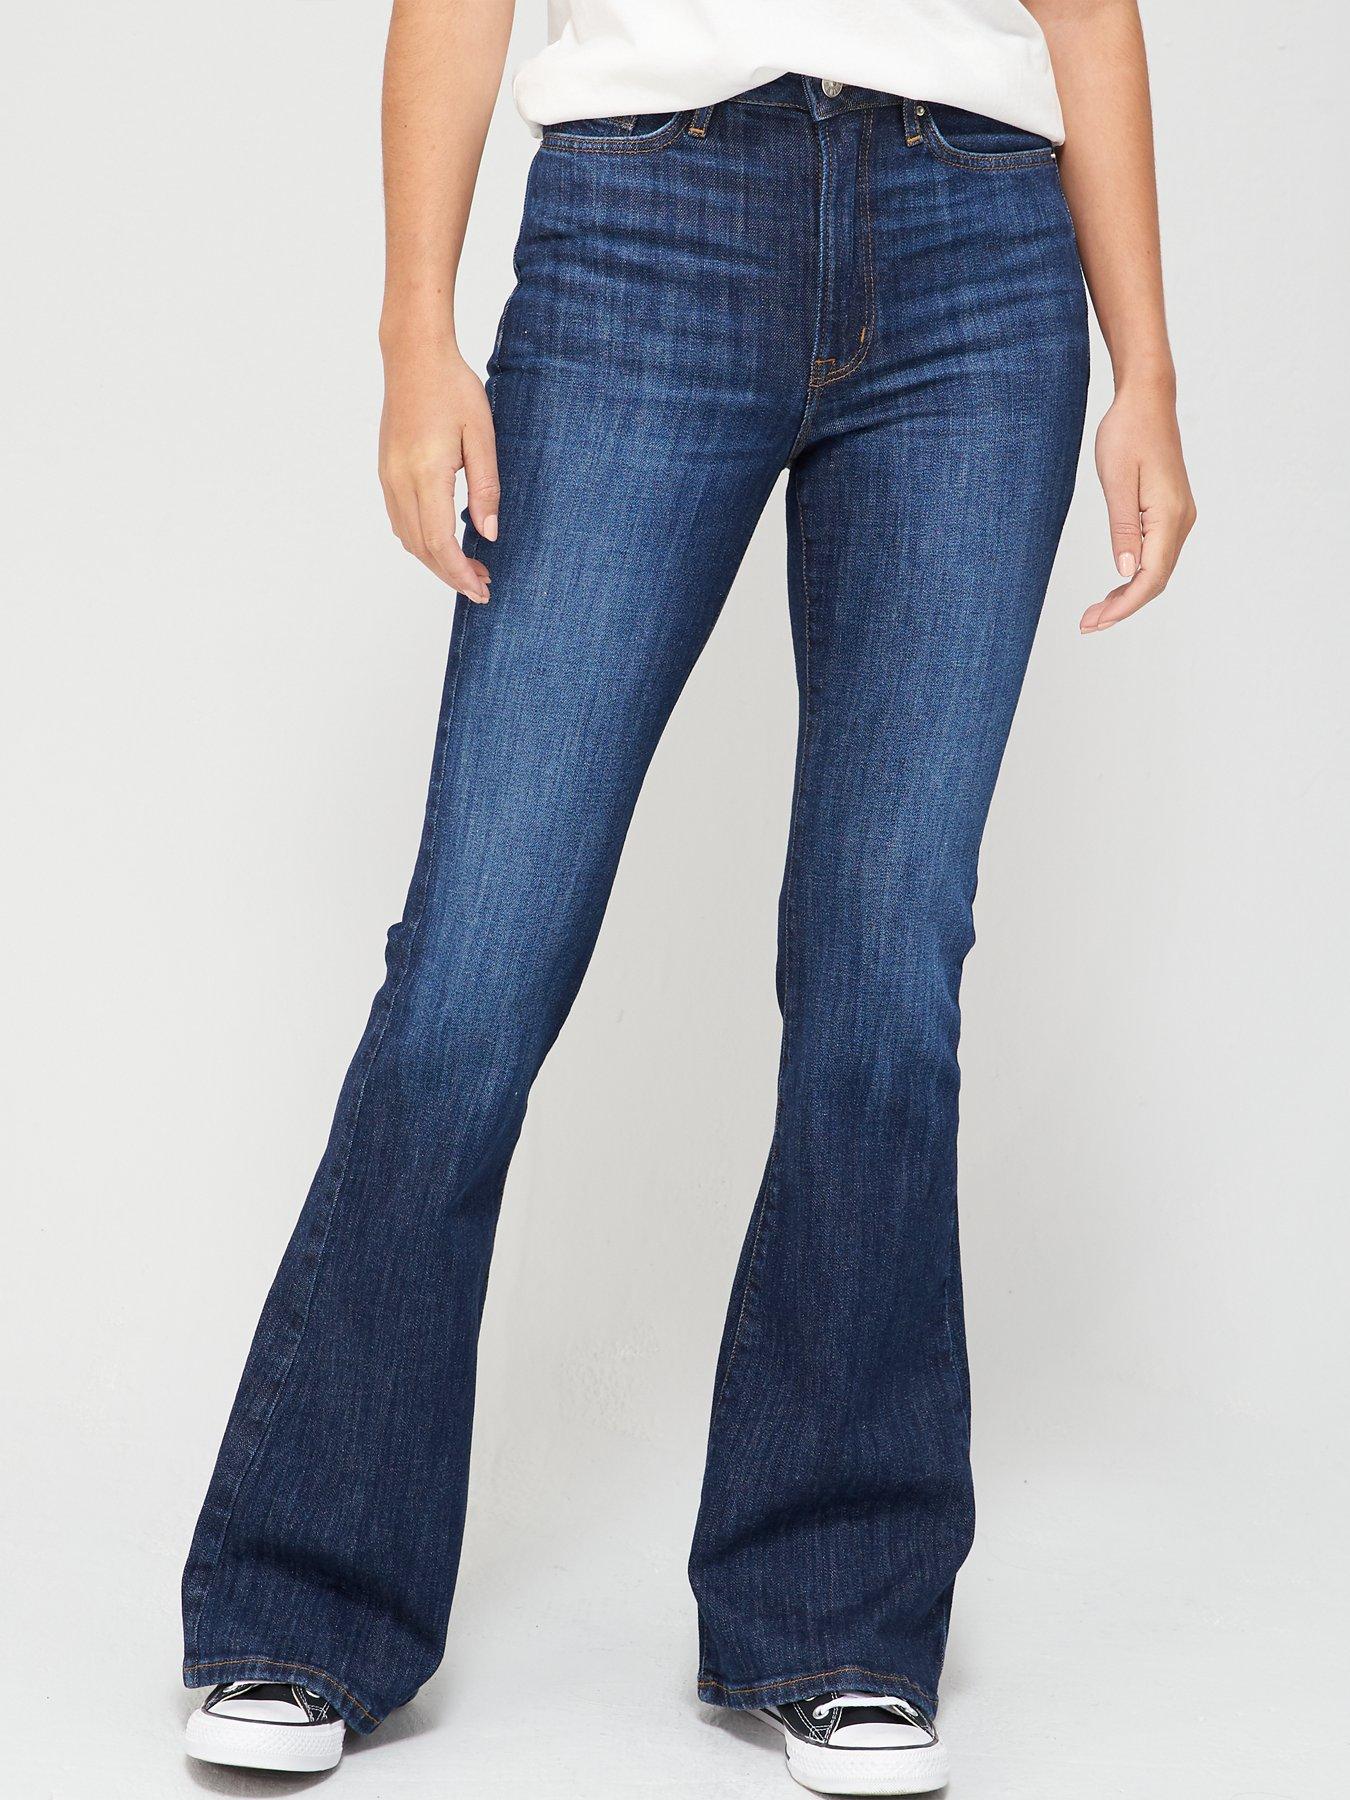 V by Very High Waist Forever Flare Jean - Dark Wash | very.co.uk